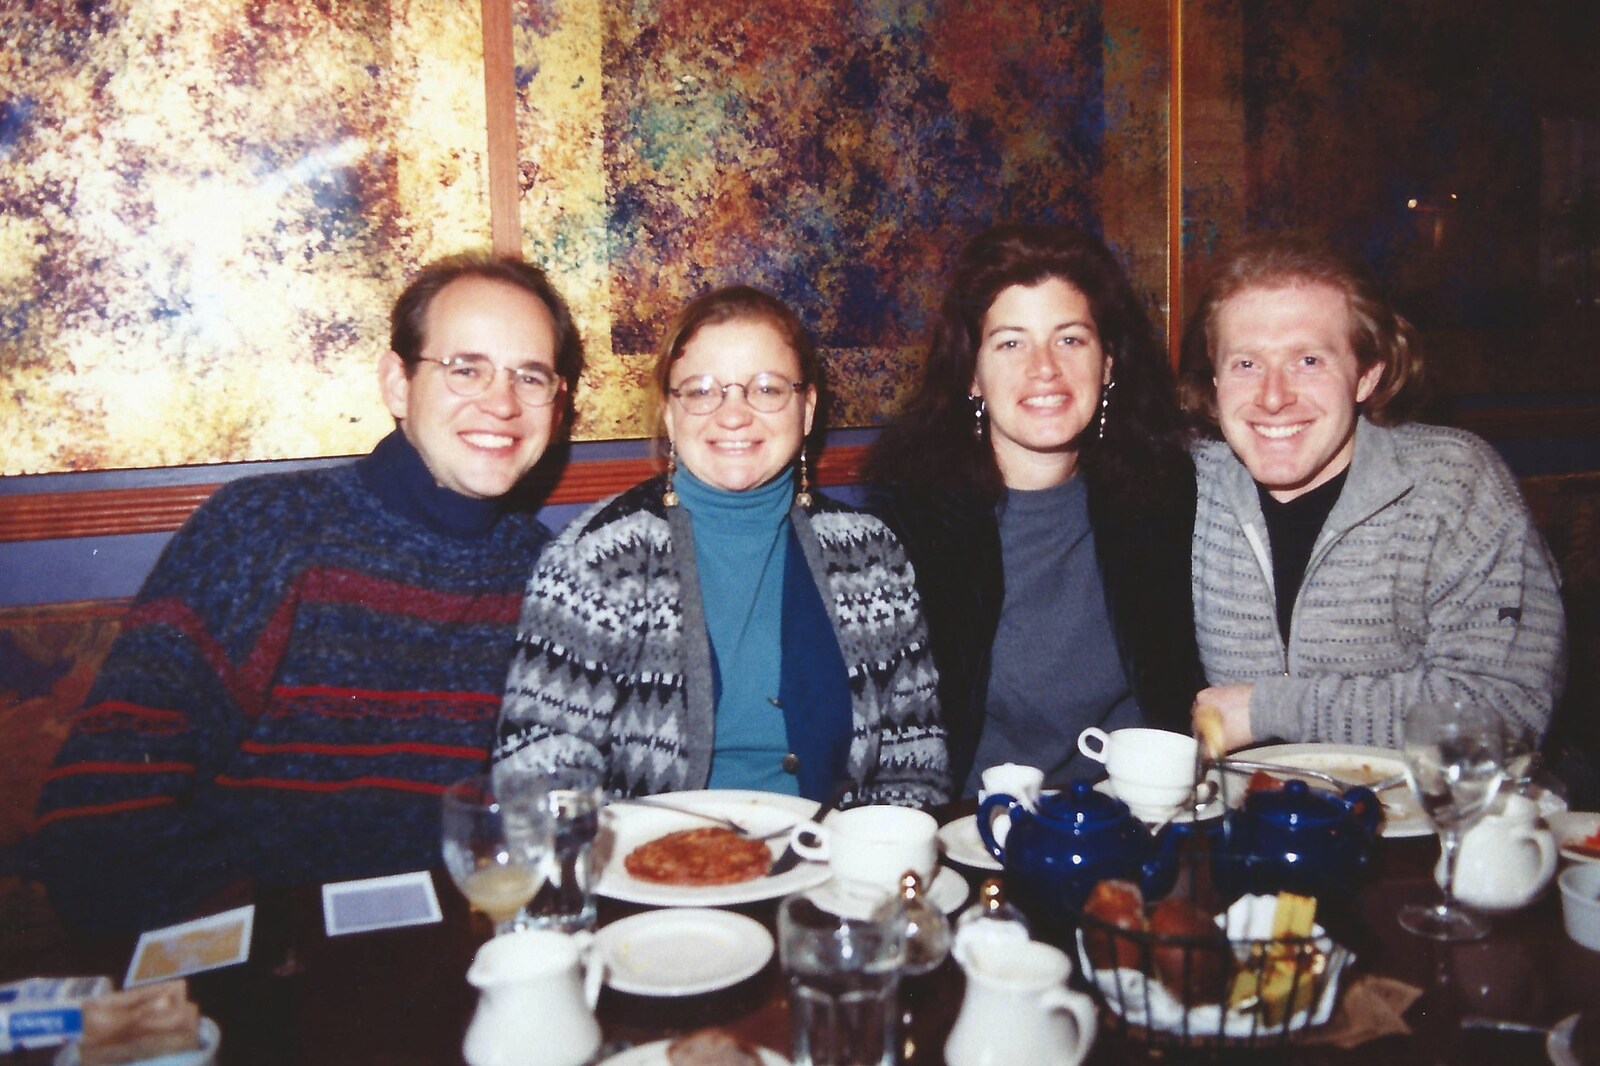 We have lunch with Phil's Russian friends from A Trip to New York, New York, USA - 11th March 1995